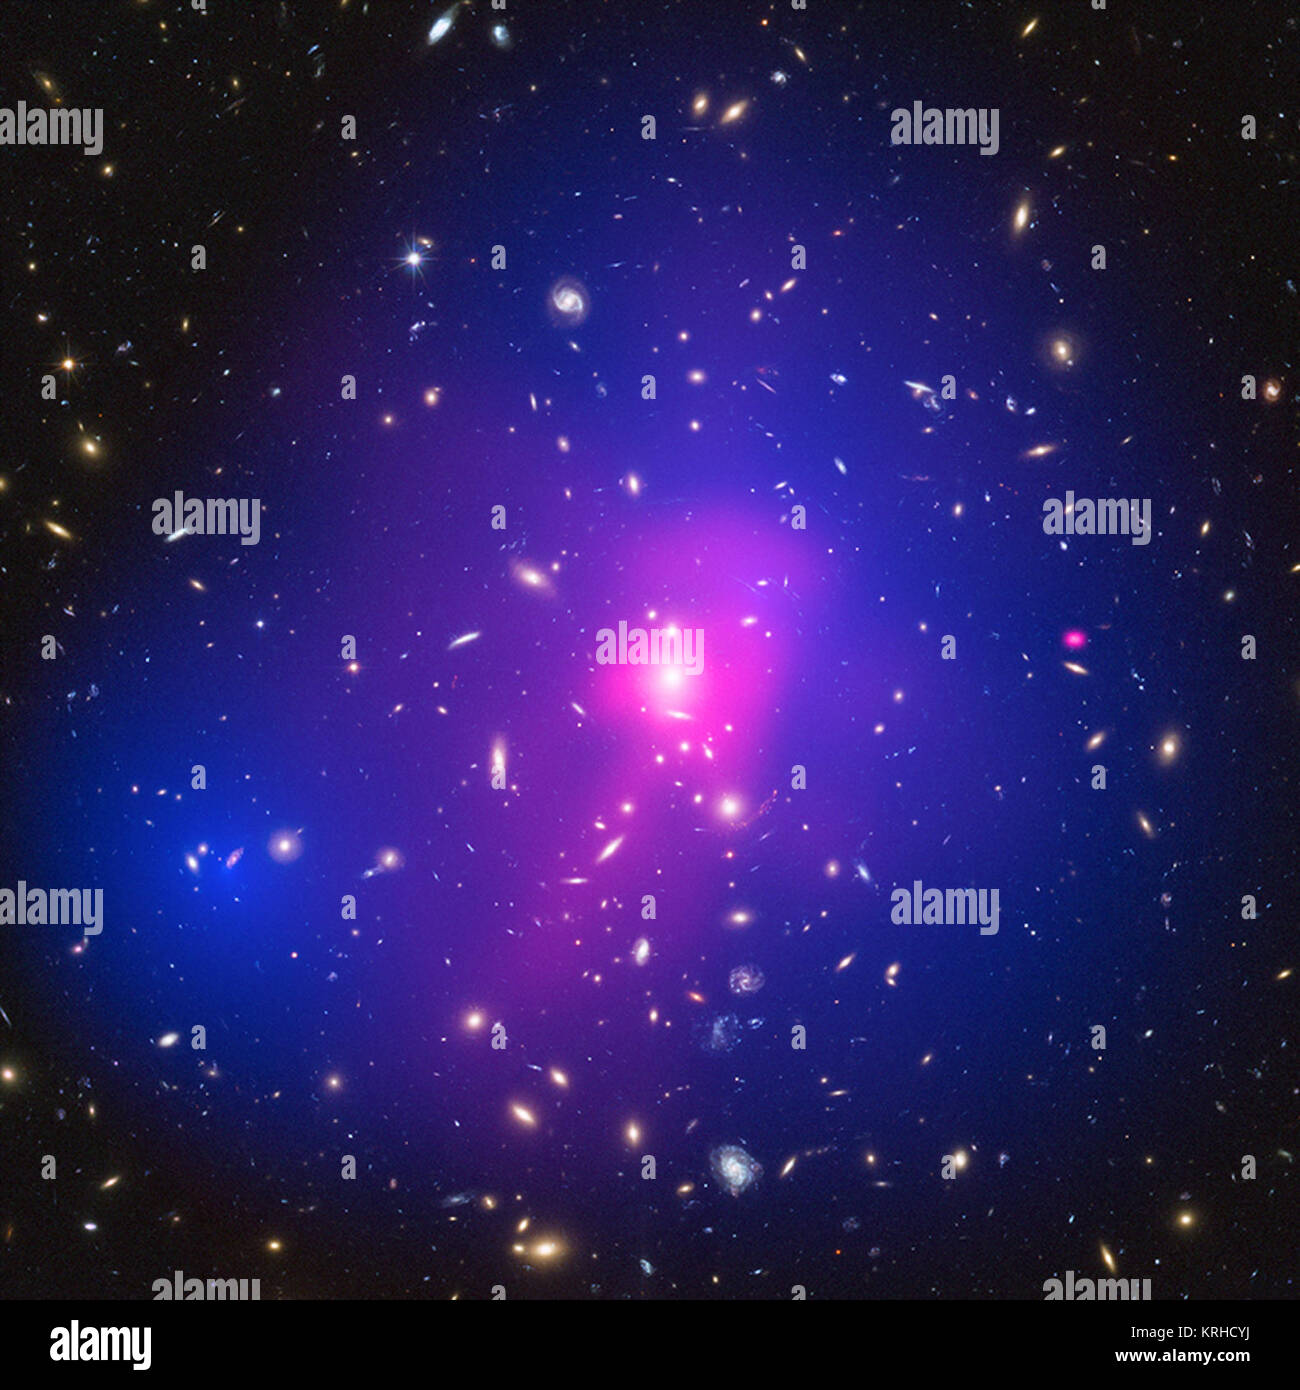 These galaxy clusters are part of a large study using Chandra and Hubble that sets new limits on how dark matter - the mysterious substance that makes up most of the matter in the Universe - interacts with itself. The hot gas that envelopes the clusters glows brightly in X-rays detected by Chandra (pink). When combined with Hubble's visible light data, astronomers can map where the stars and hot gas are after the collision, as well as the inferred distribution of dark matter (blue) through the effect of gravitational lensing. ZwCl 1358 62 (Chandra & Hubble) Stock Photo